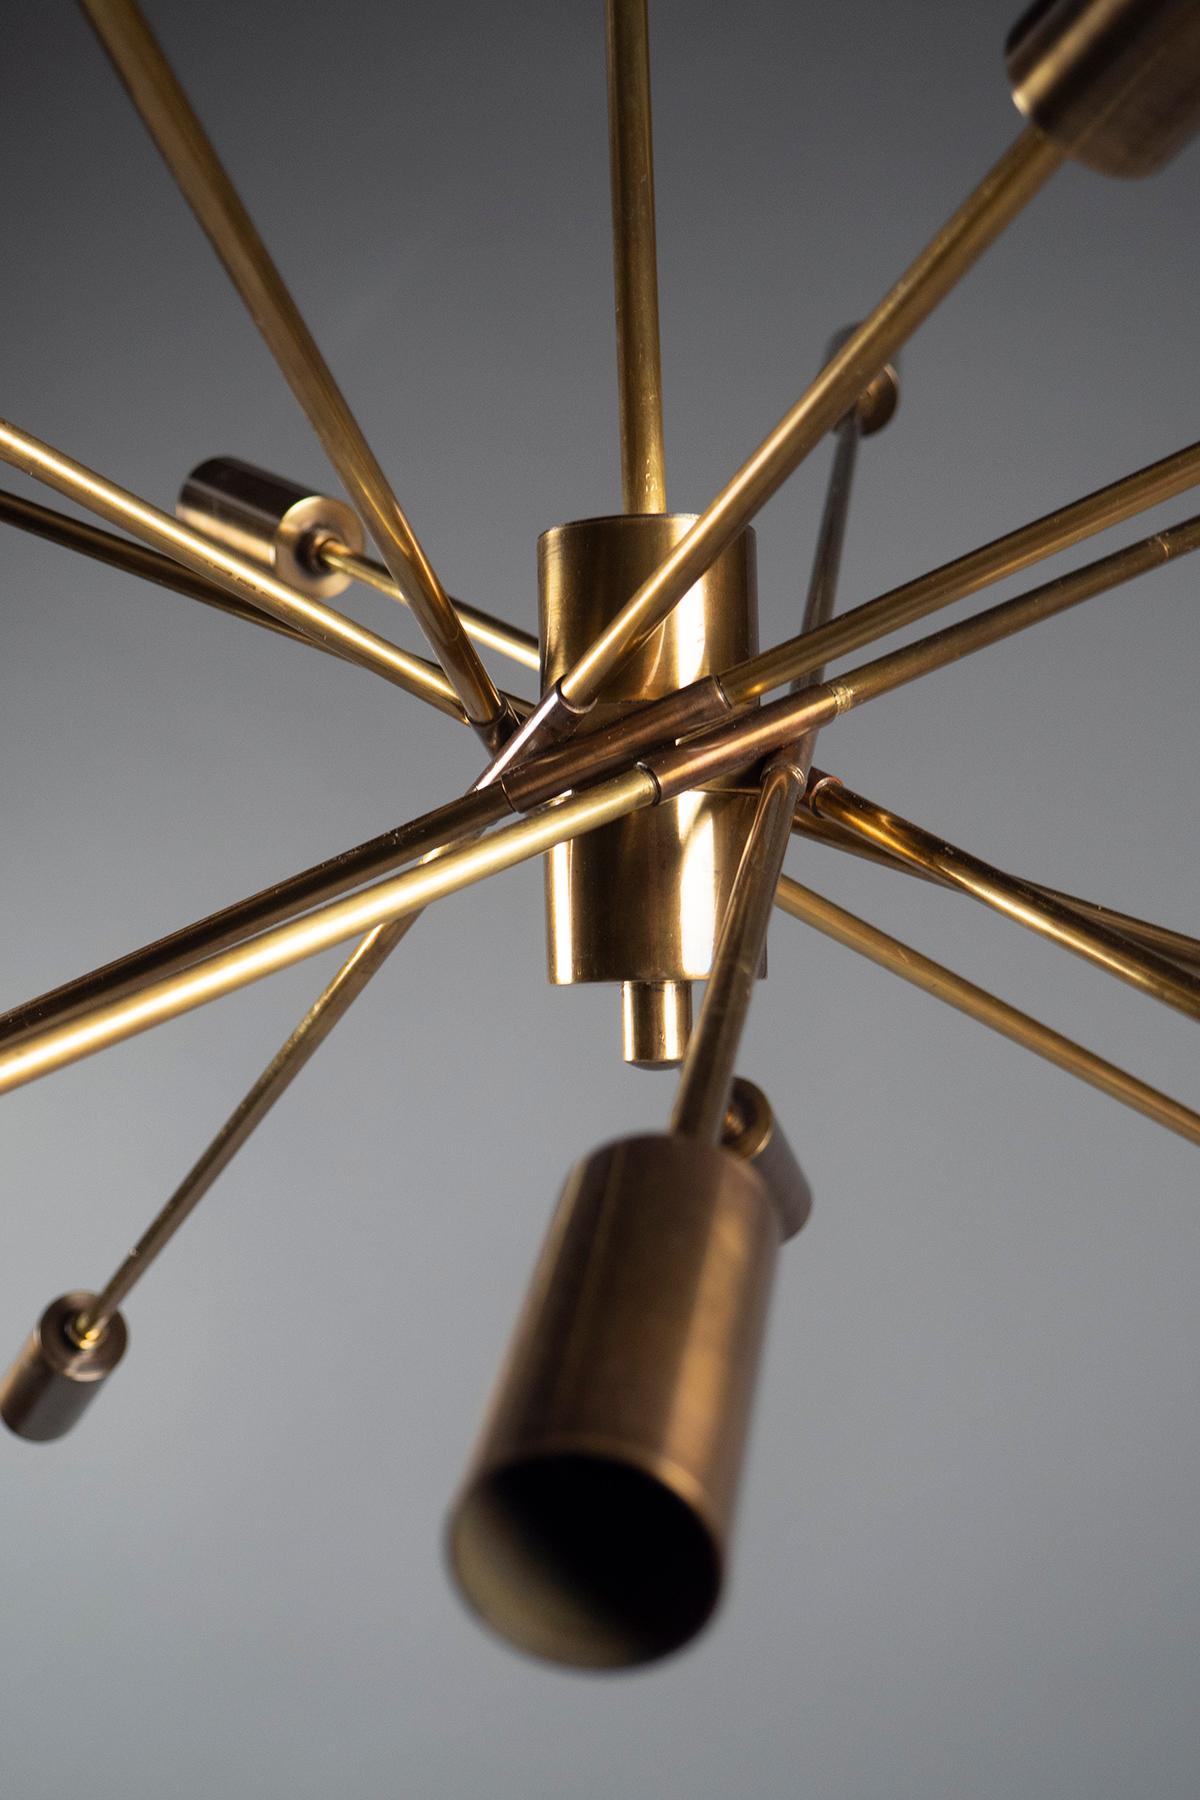 This “Sputnik” chandelier refers to the 1957 satellite that sparked the space race. Sarfatti’s iconic design captures the tension of time with its precariously balanced brass arms that manage to find equilibrium in seeming defiance of gravity.
16